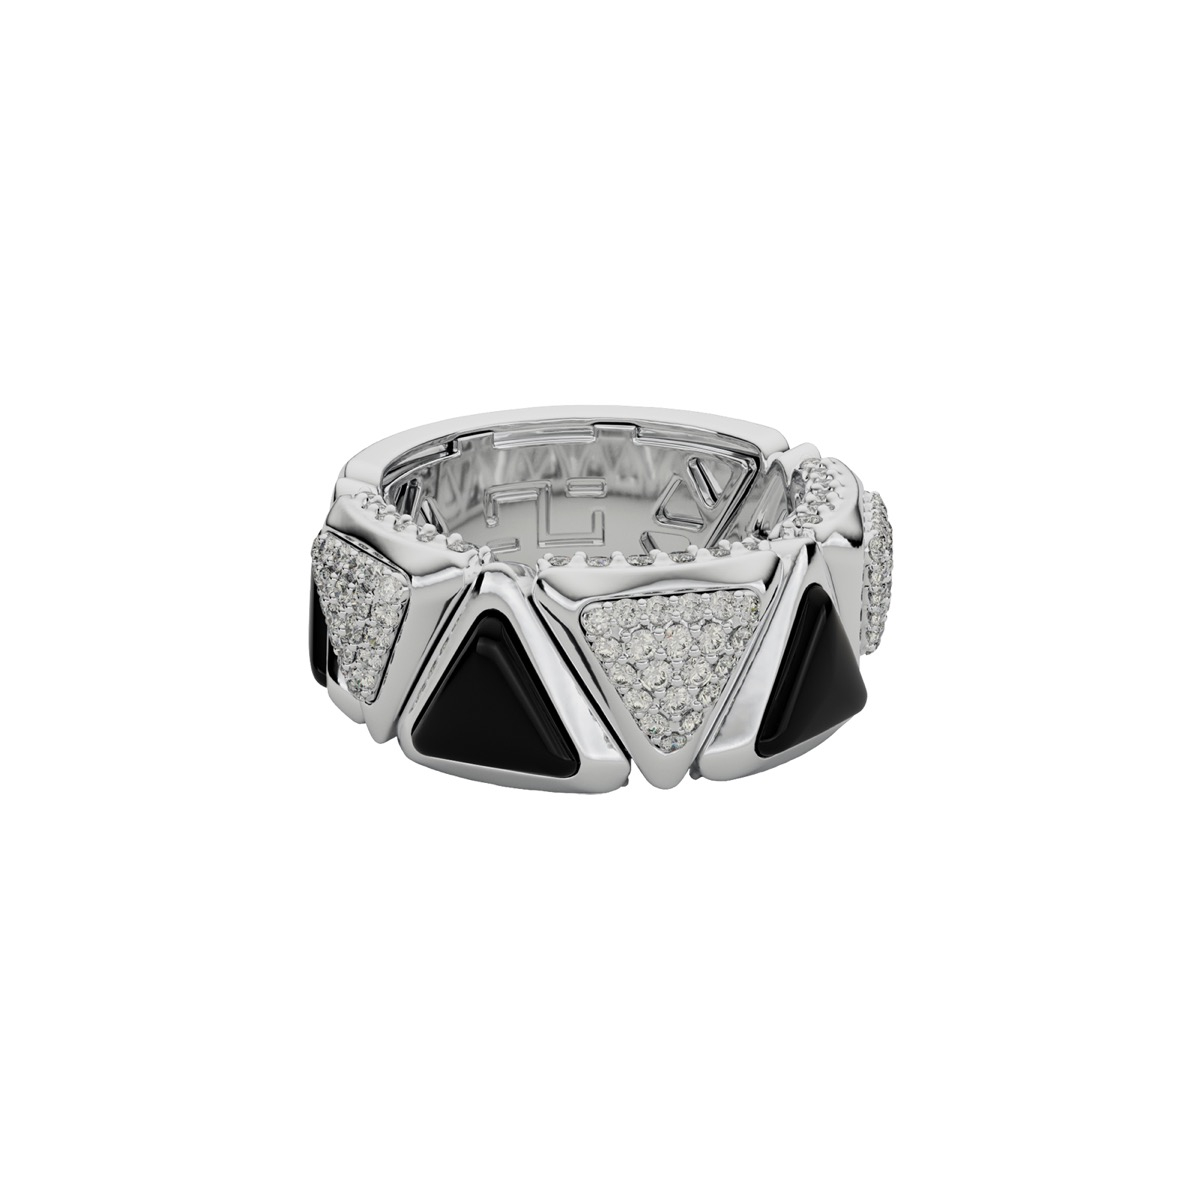 Ring Mirror Exquisite White Gold Onix and Diamonds